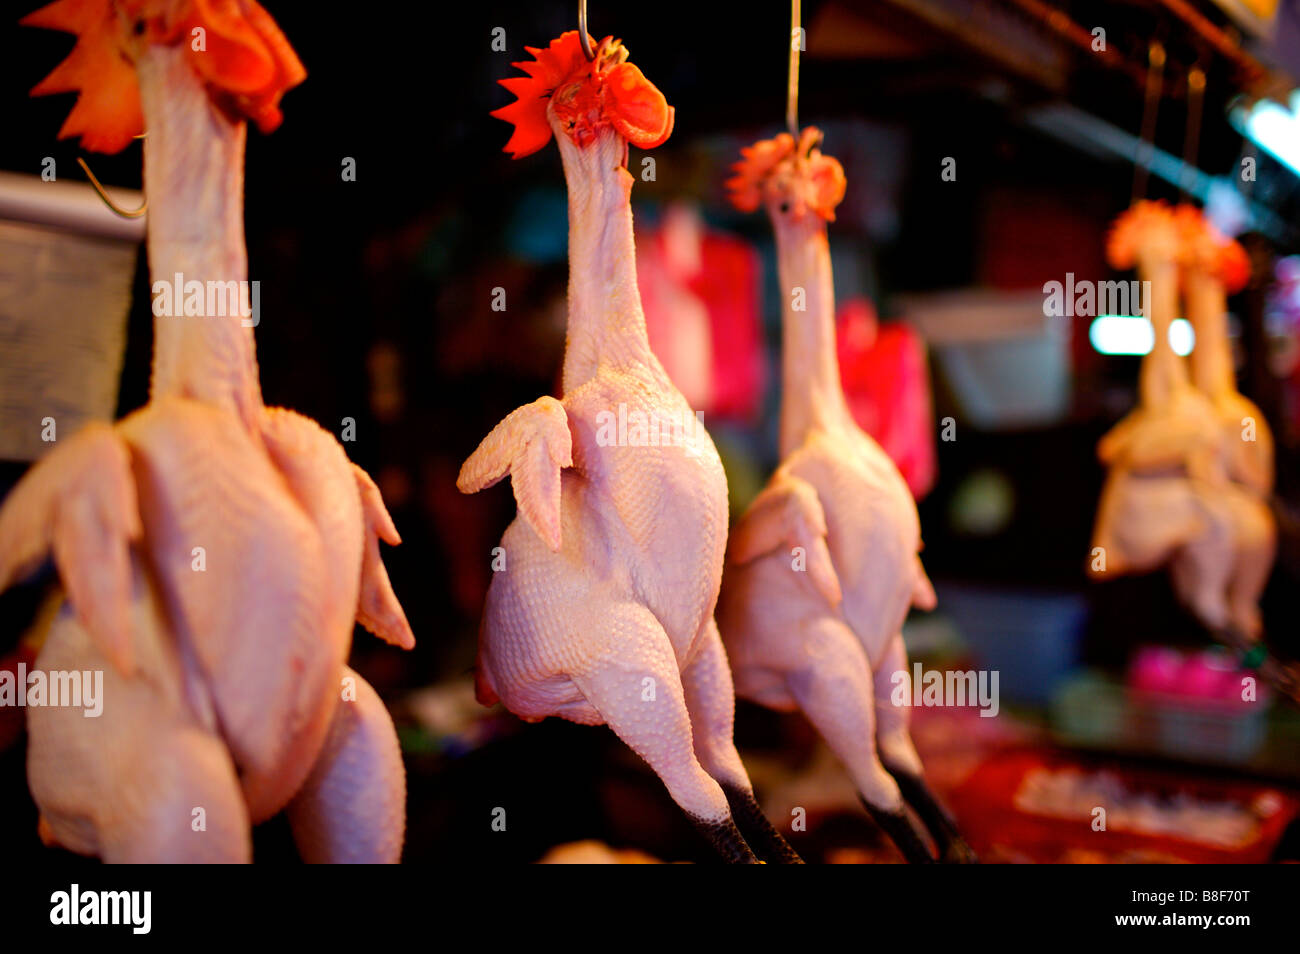 Fresh whole chickens hanging from hooks plucked on display in a market stall Stock Photo